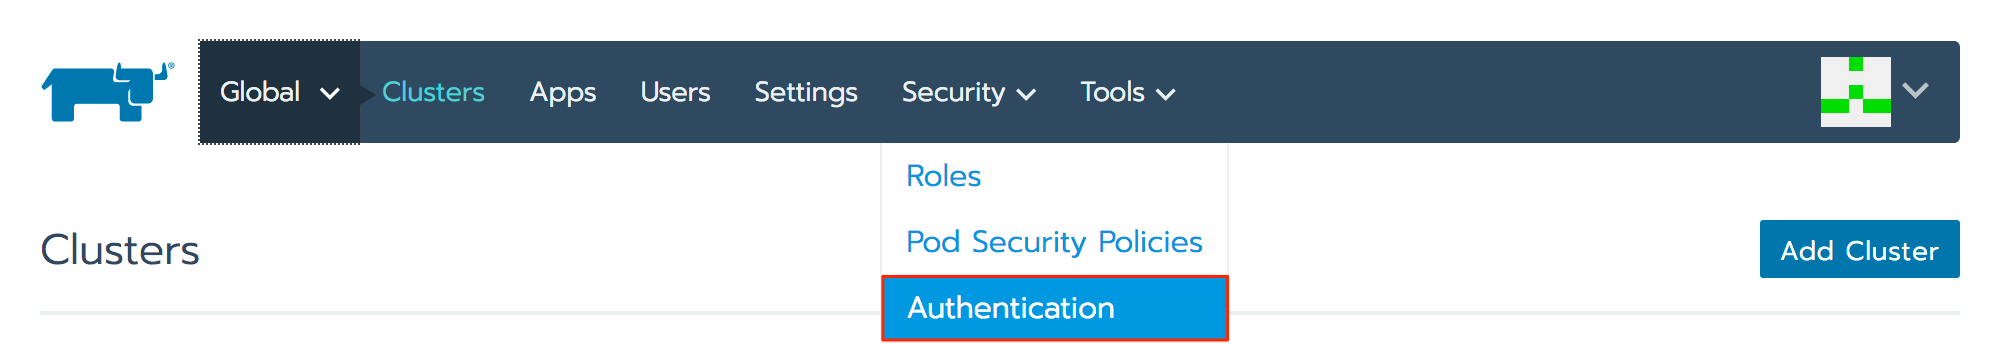 Rancher Security navigation bar item - Authentication highlighted